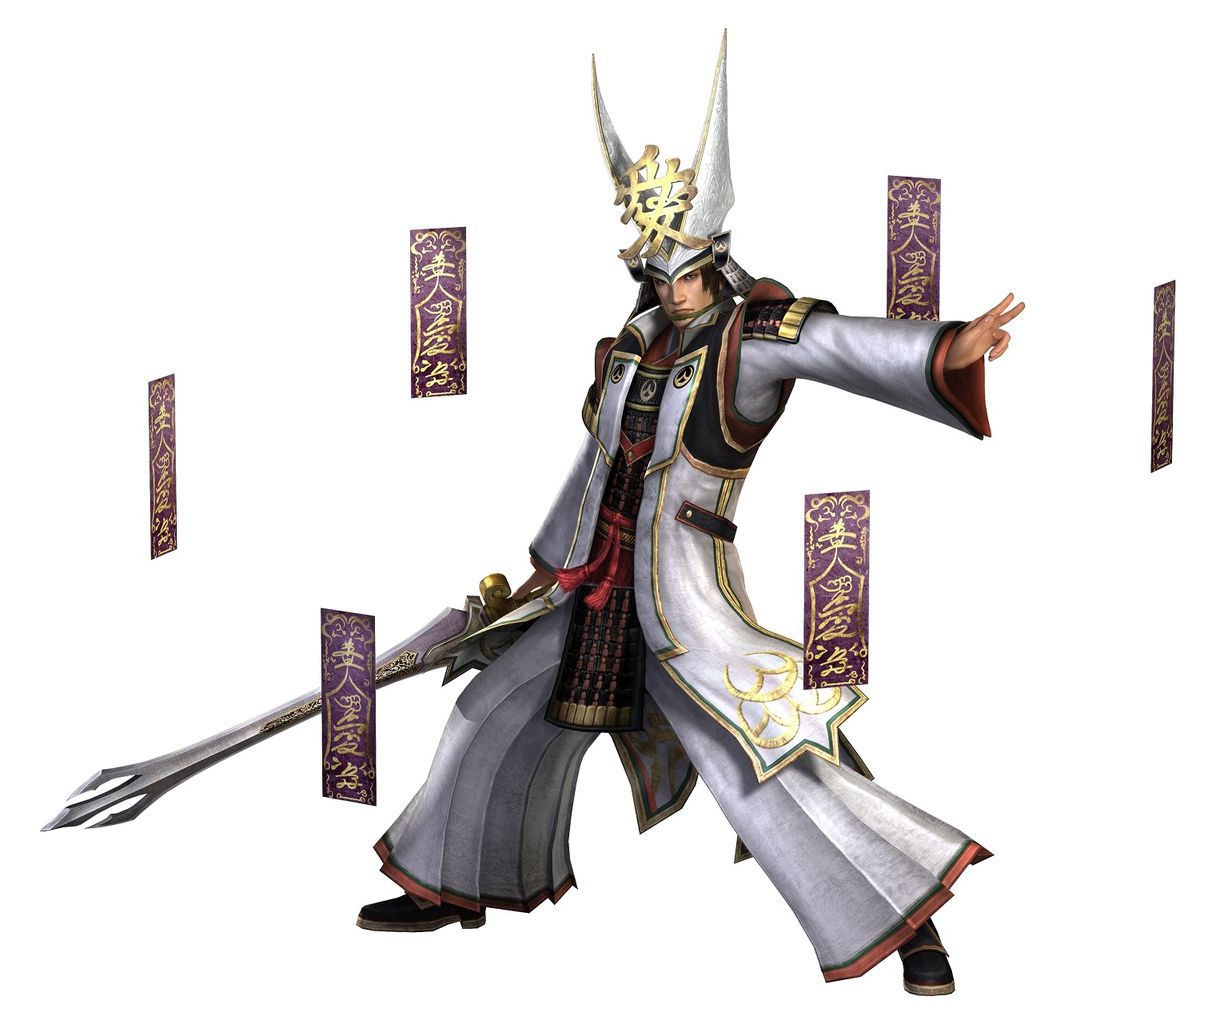 Image of the character in the Samurai Warriors series summary 89